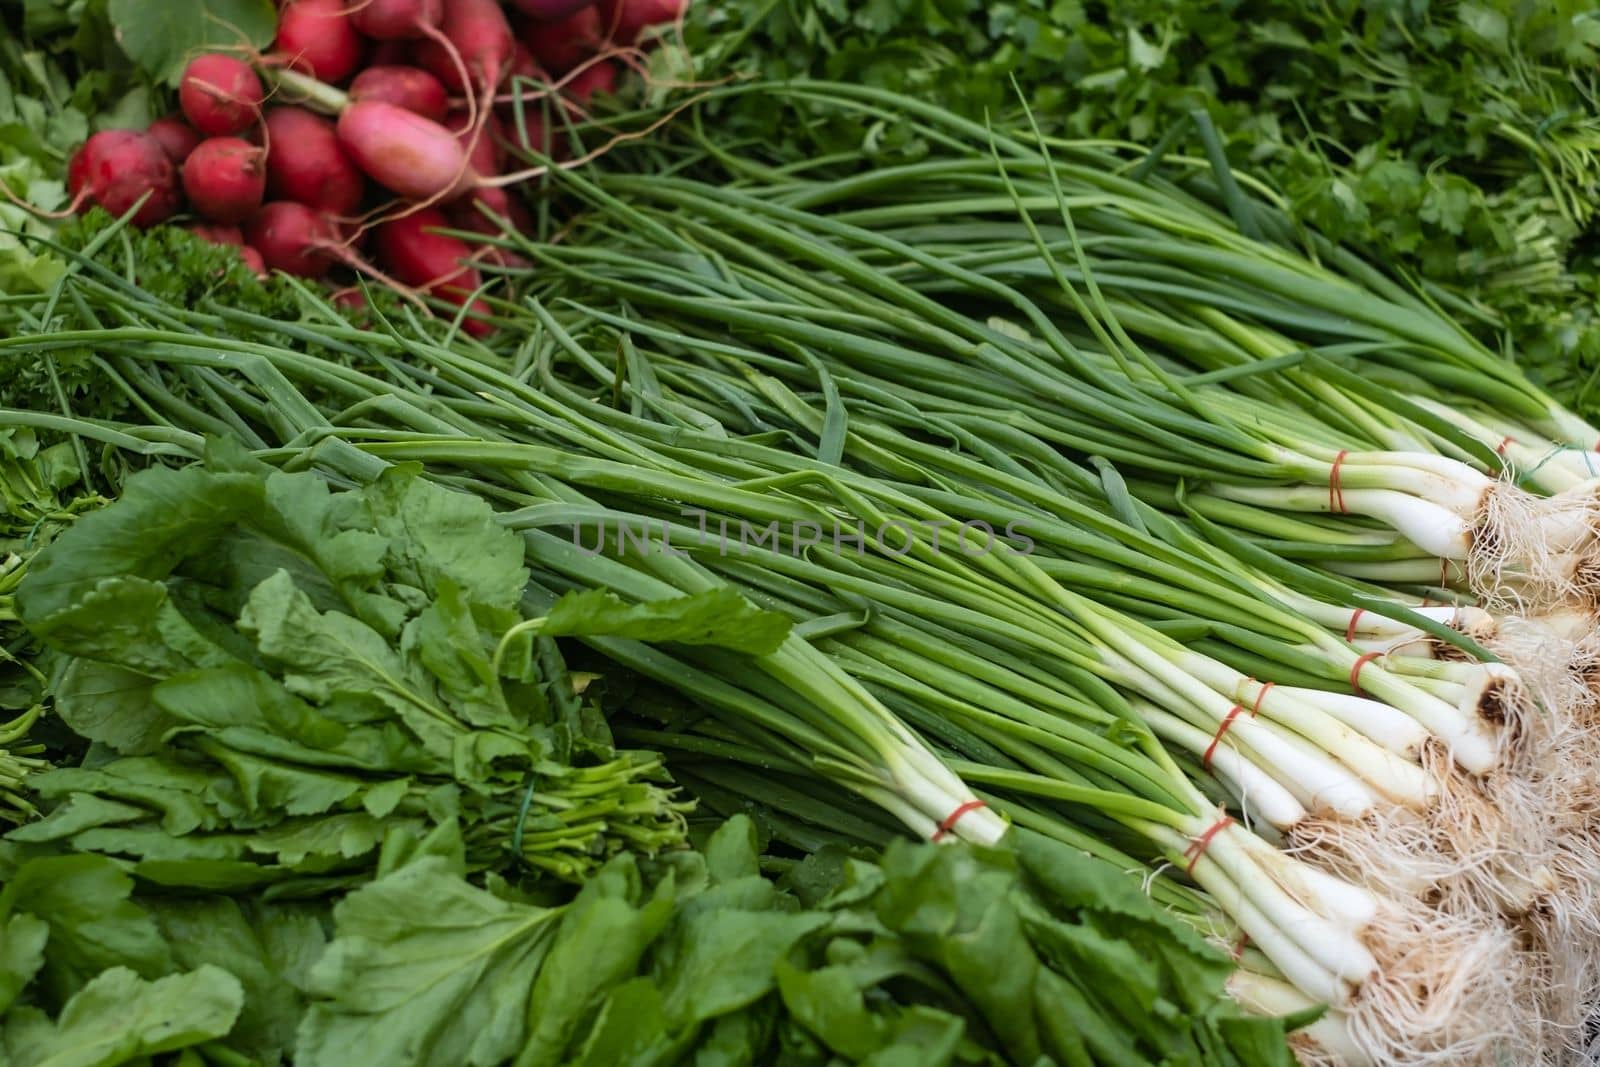 Bunches of green onions on display at a farmers' market. 